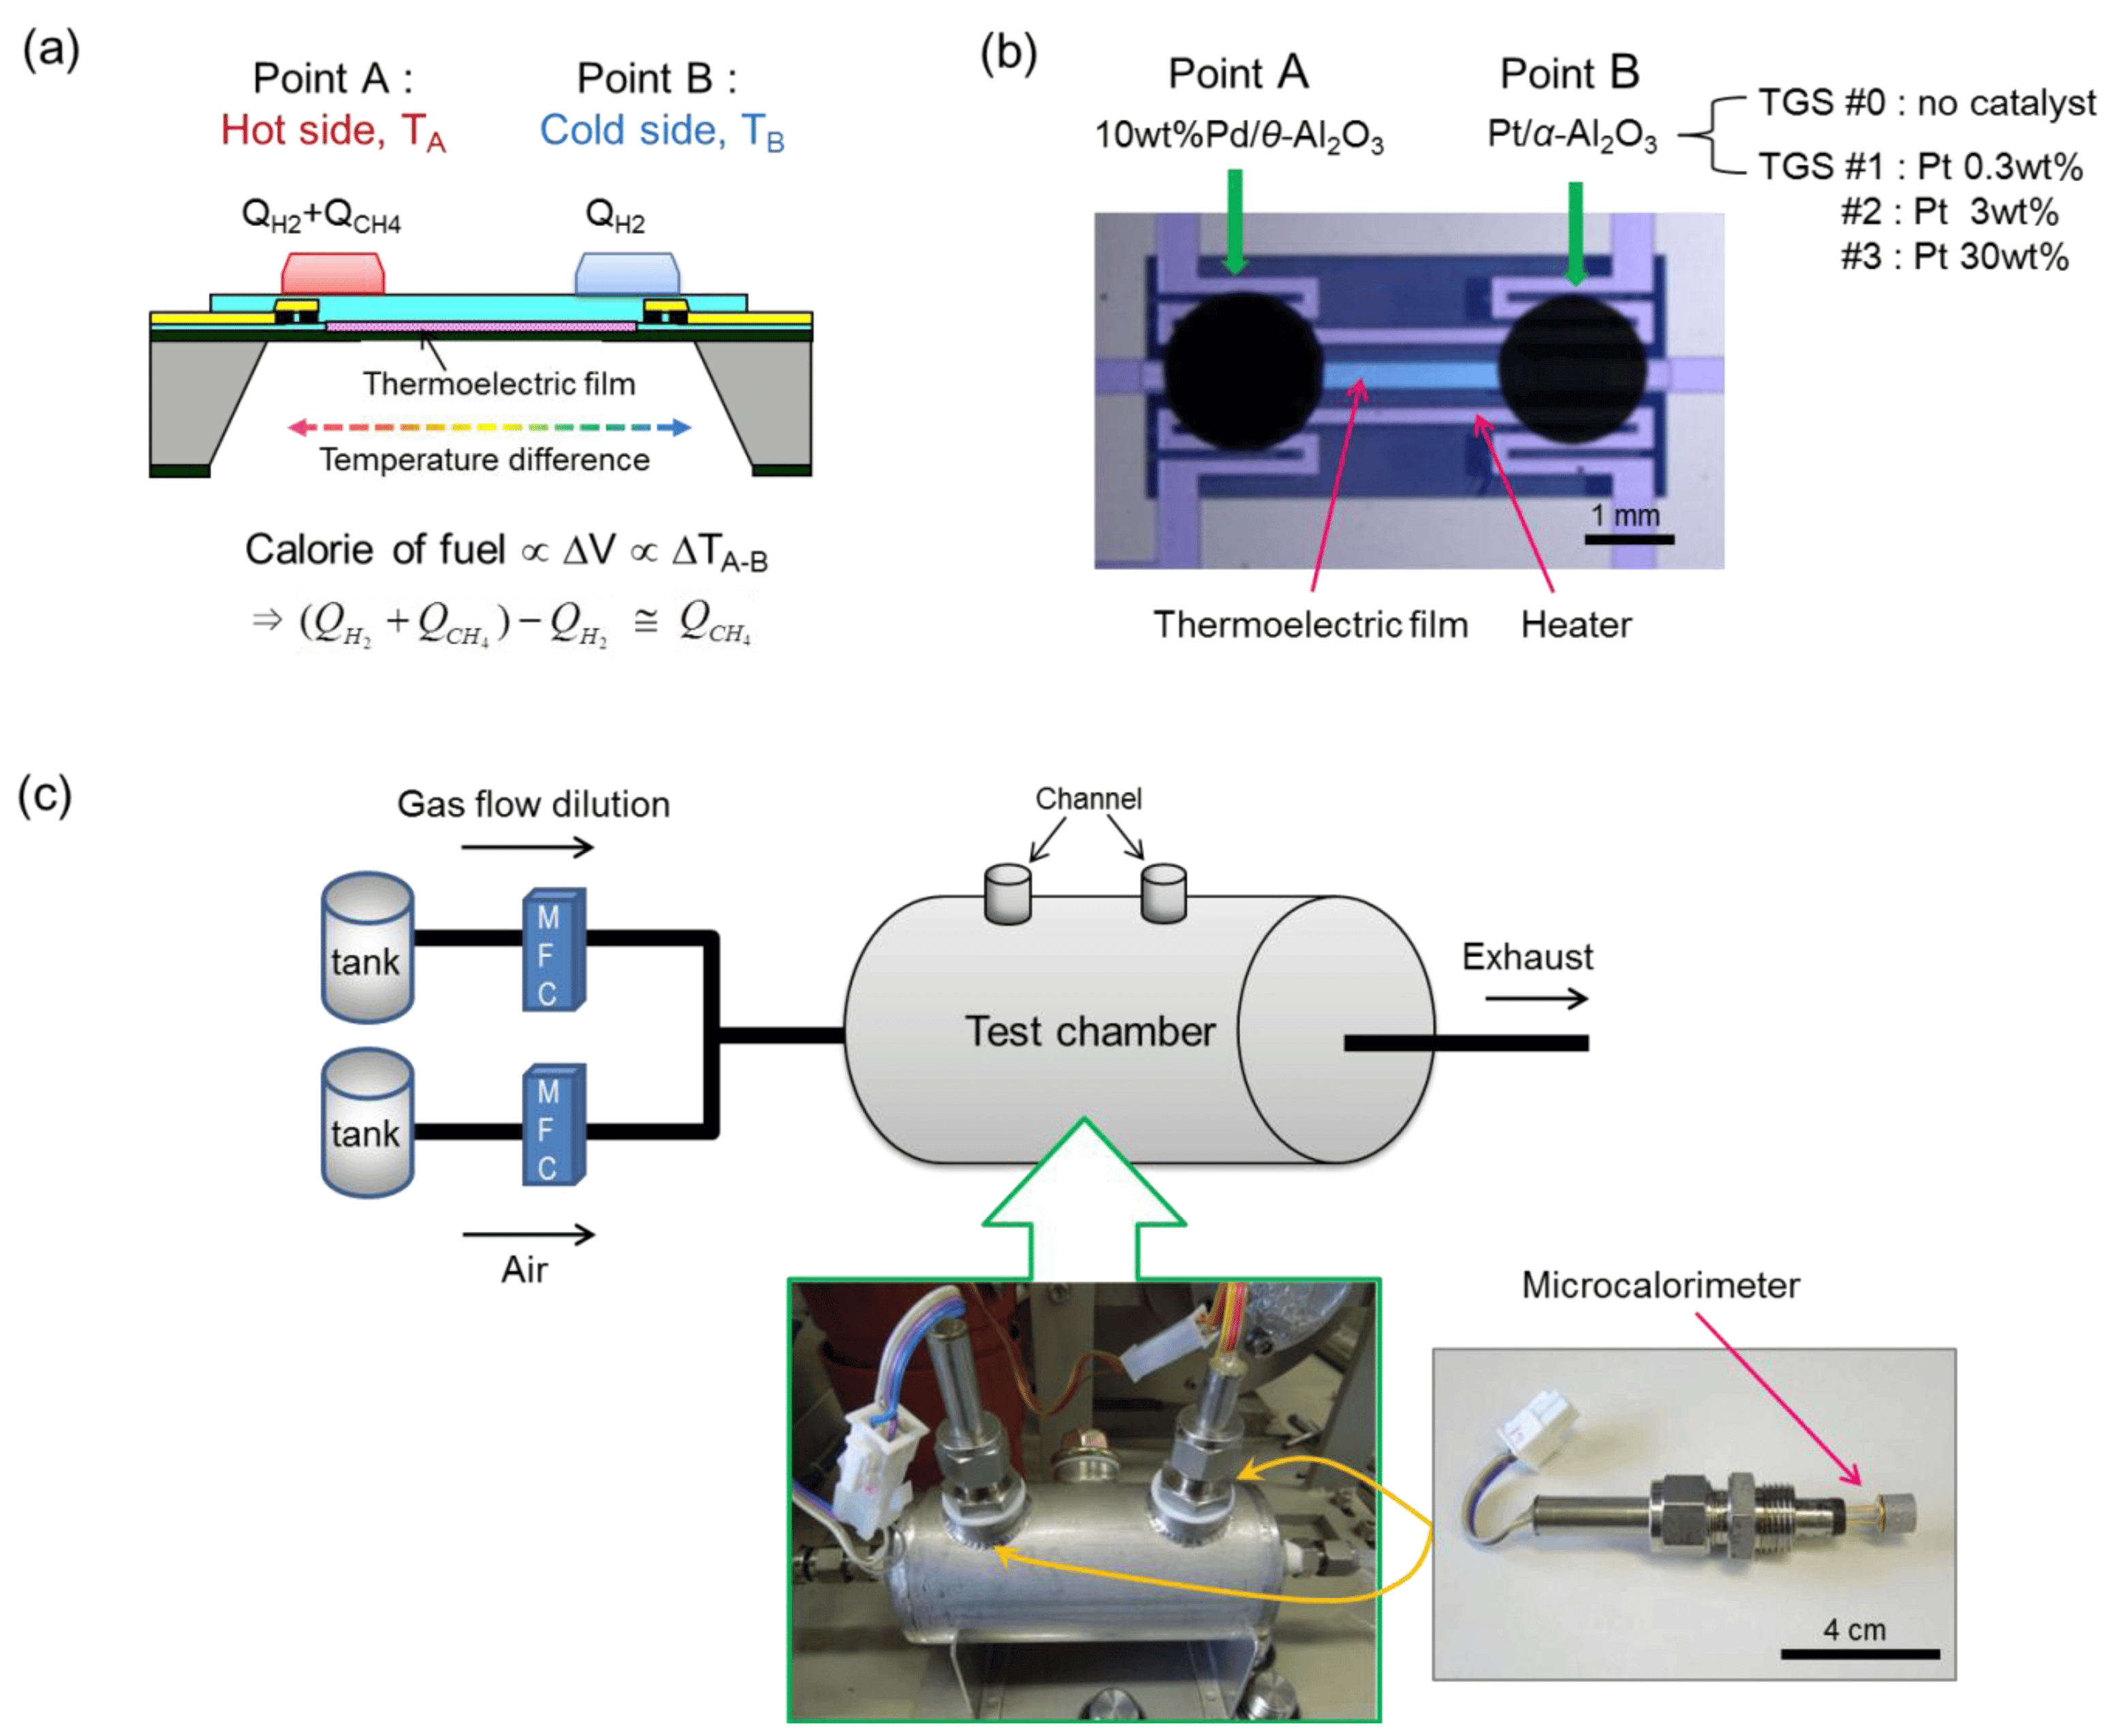 (a) Schematic illustration of device structure and working principle, and (b) photograph of a calorimetric-TGS device. (c) Schematic and photograph of the measurement system for the calorimetric-TGS devices.